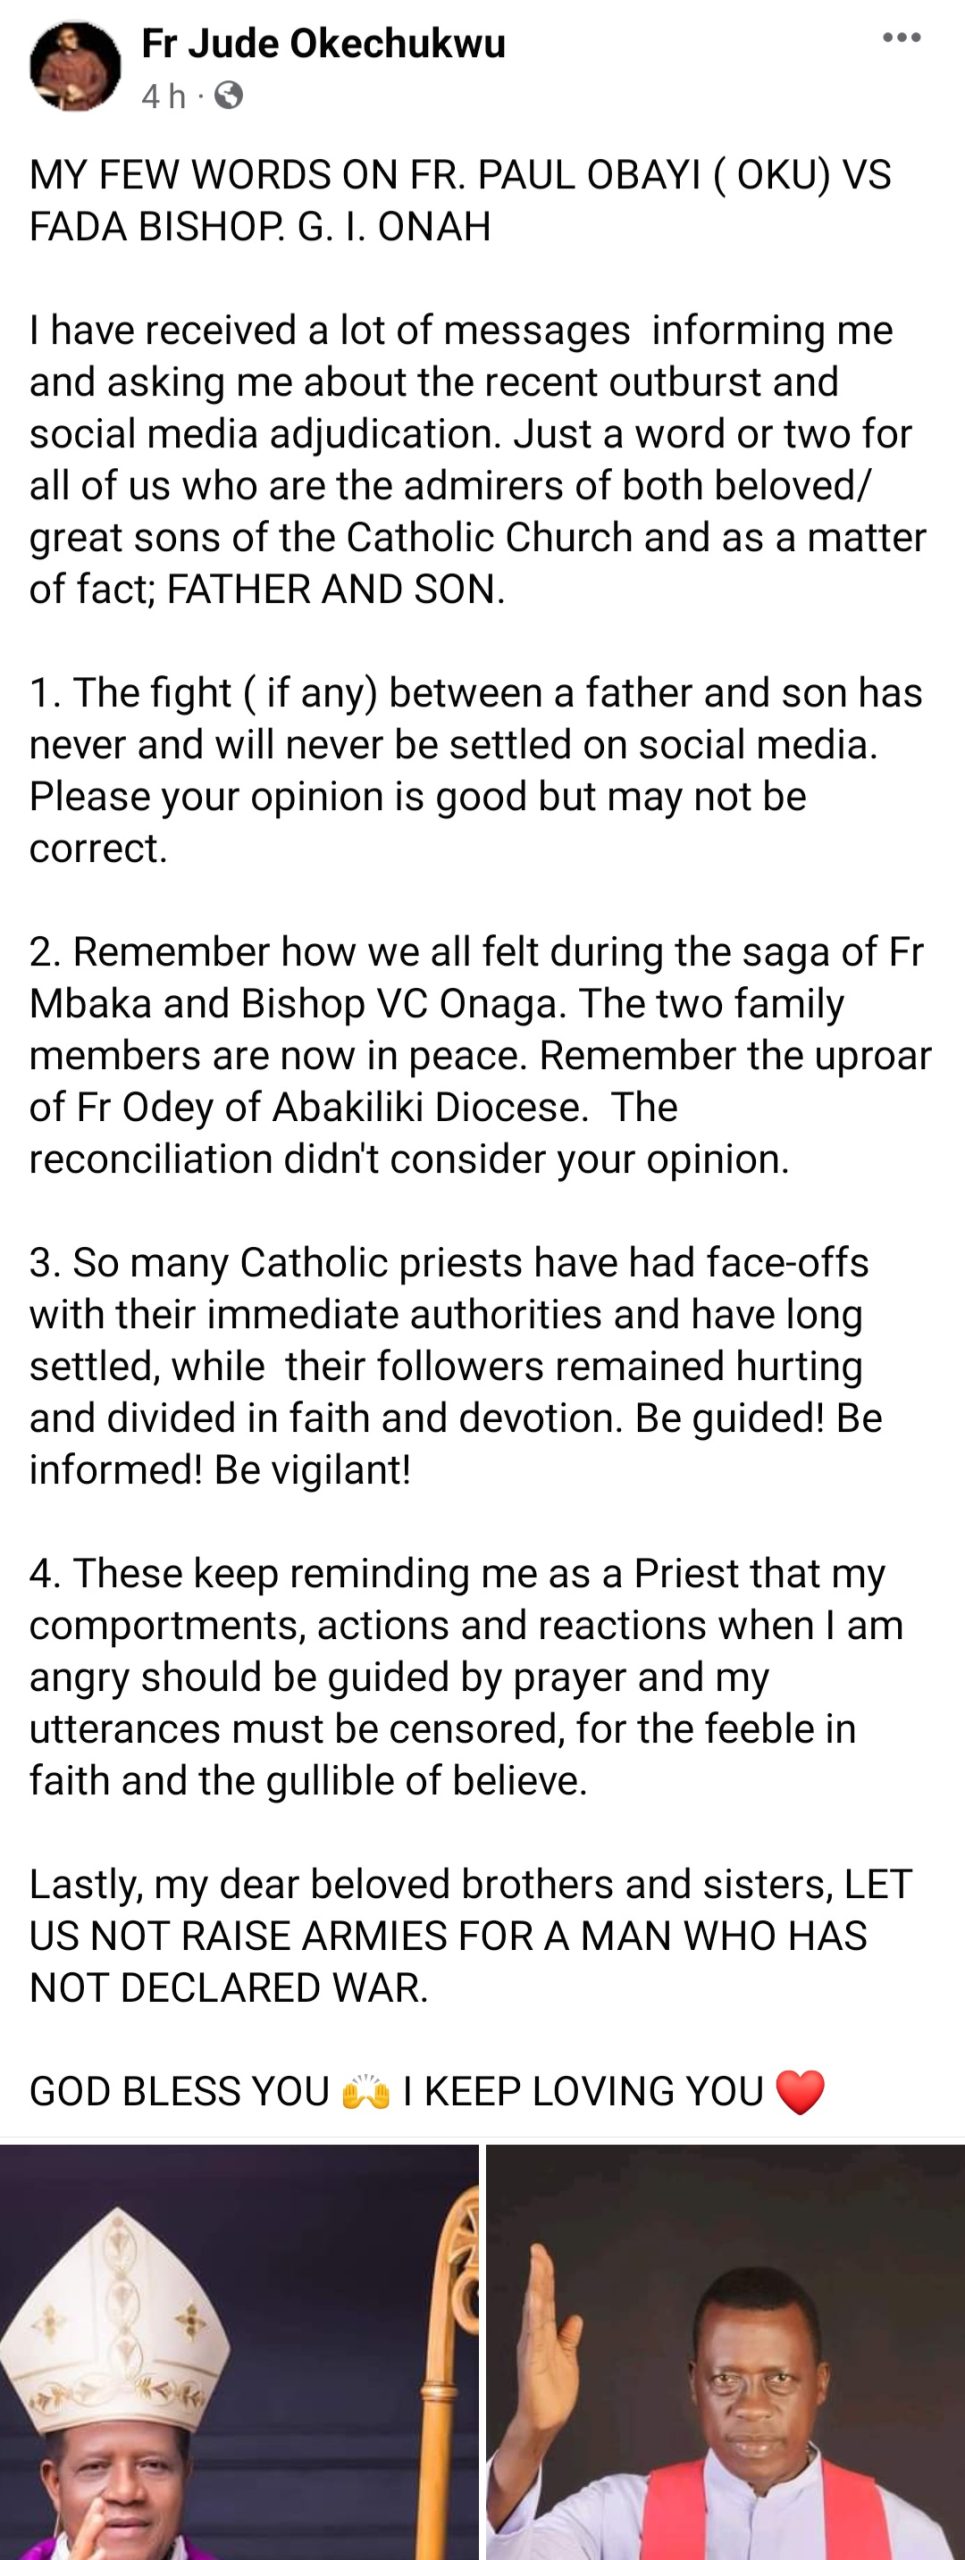 "The fight between a father and son will never be settled on social media" Catholic Priest advices as Fr Paul Obayi threatens to leave Catholic church over alleged oppression from Bishop Onah